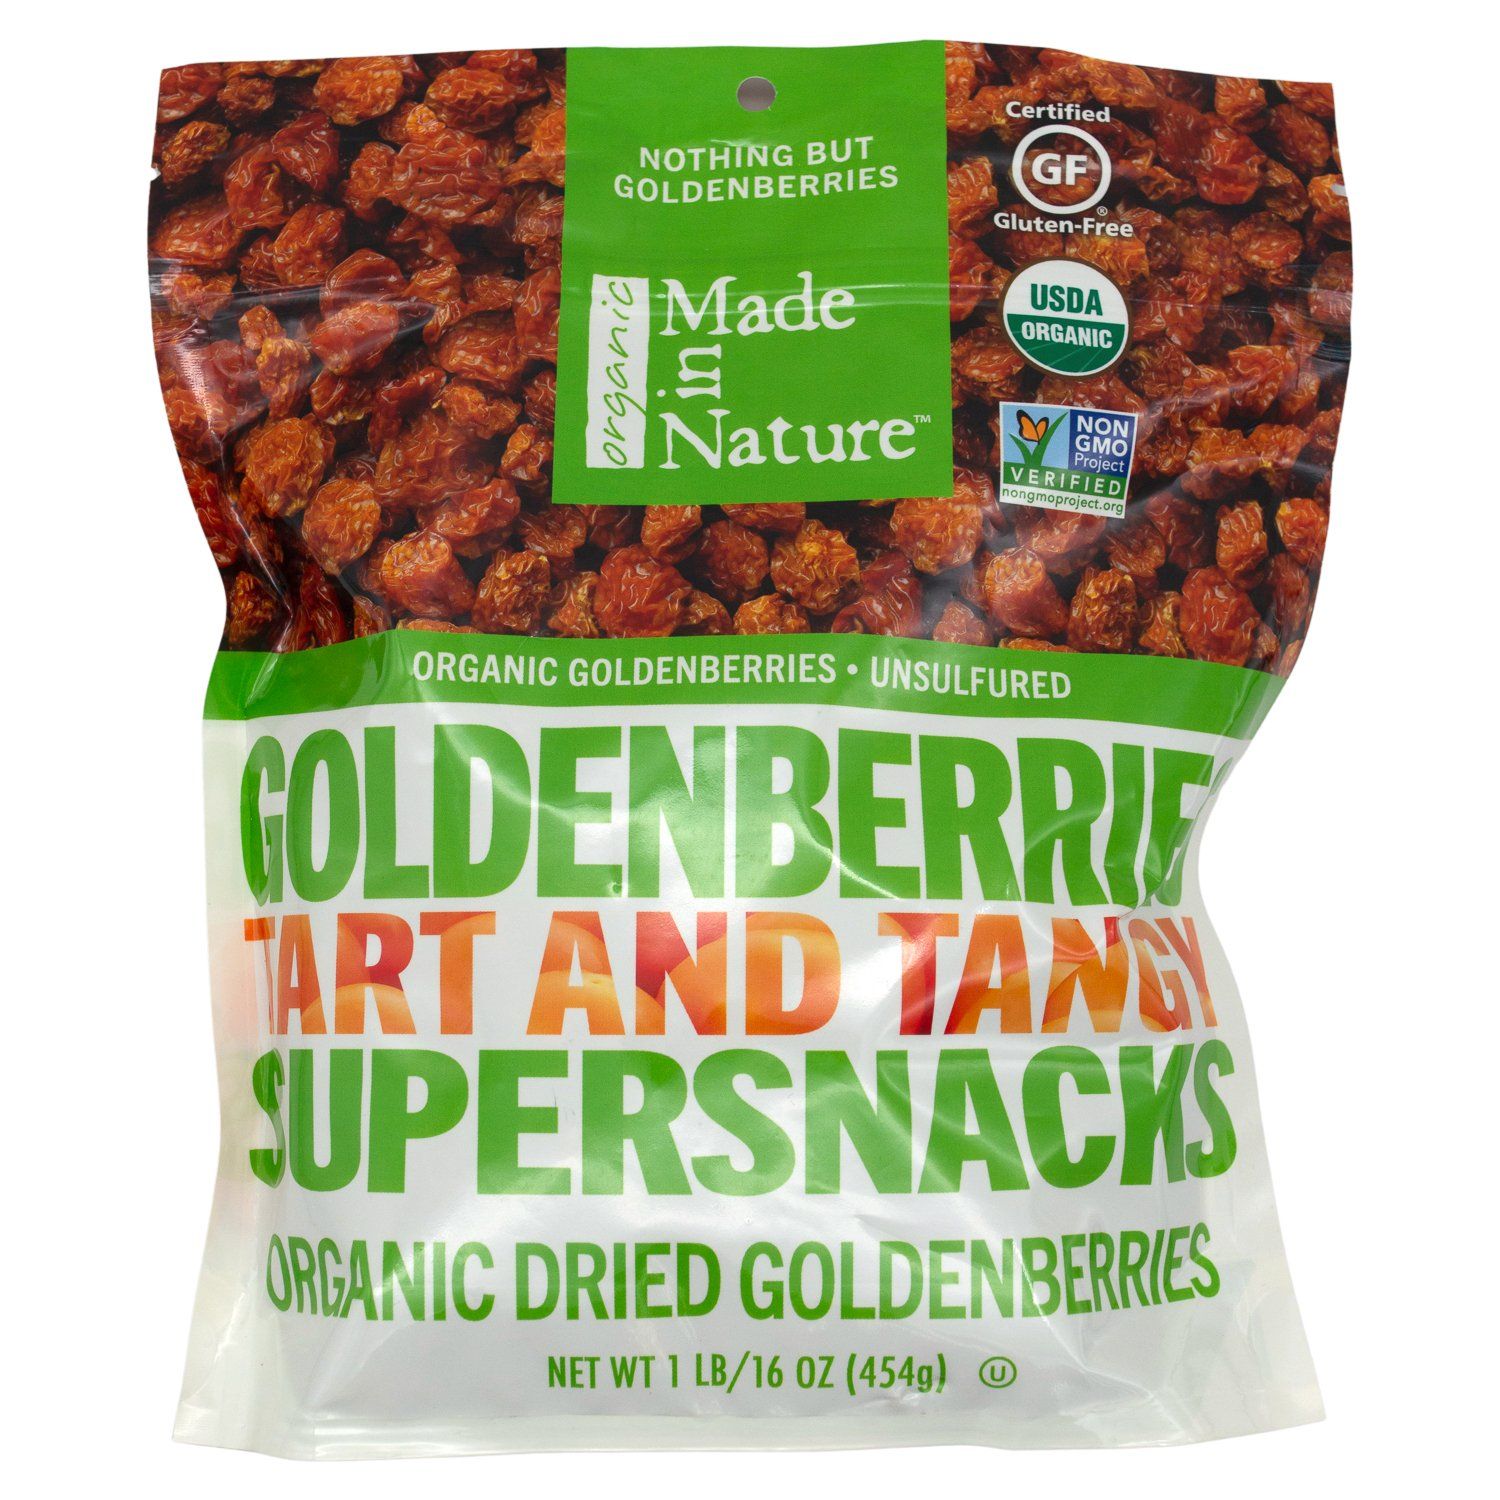 Made in Nature Organic Dried Goldenberries